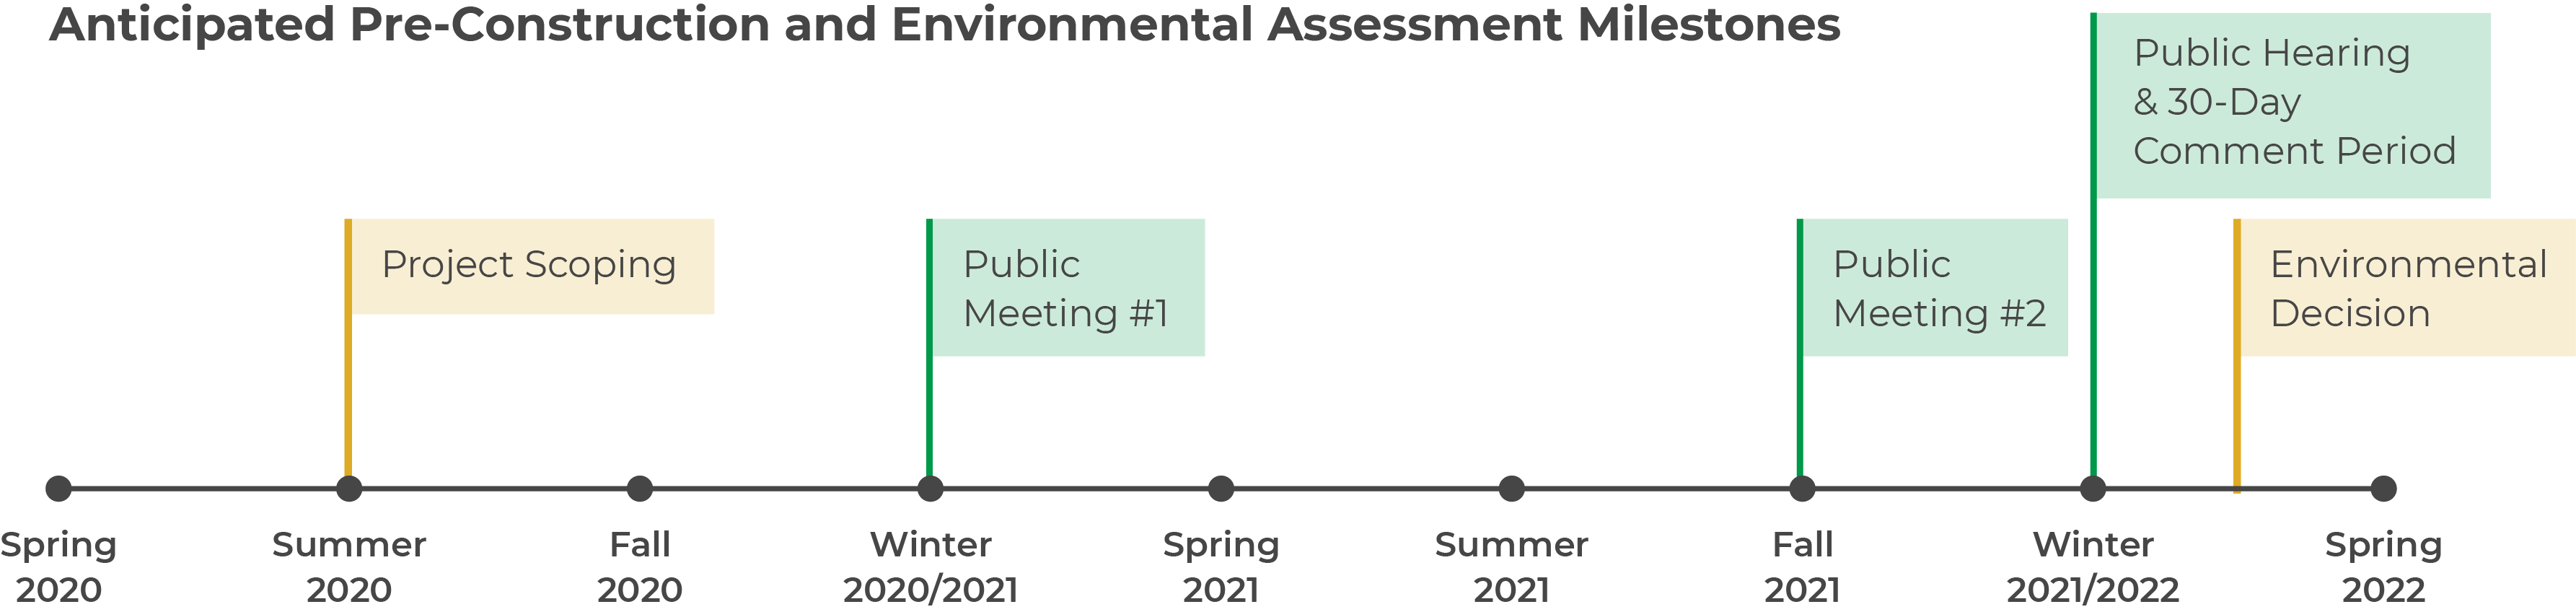 Timeline depicting project scoping in September 2020, first public meeting in winter 2020/2021, second public meeting in fall 2021, and the public hearing and 30-day comment period, as well as an environmental decision in winter 2021/2022.